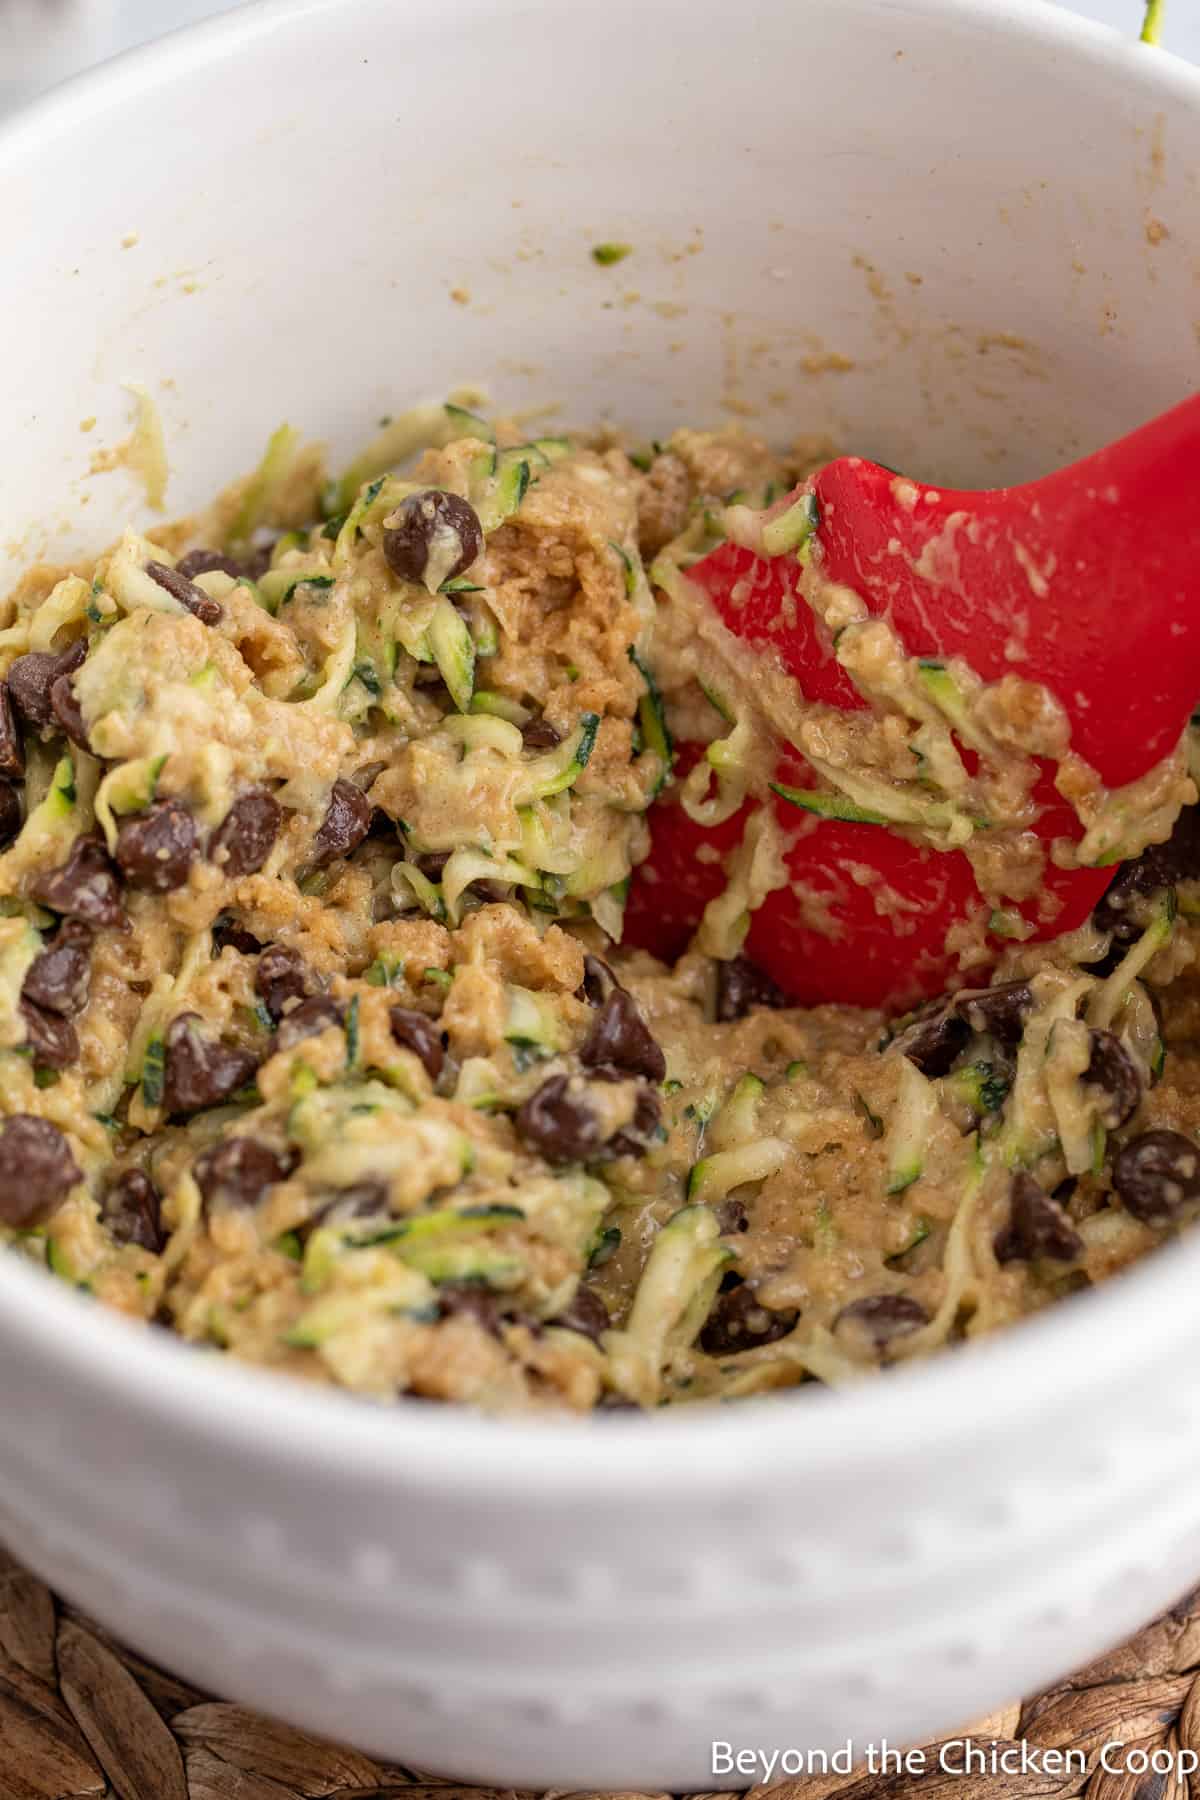 Mixed zucchini batter with chocolate chips. 